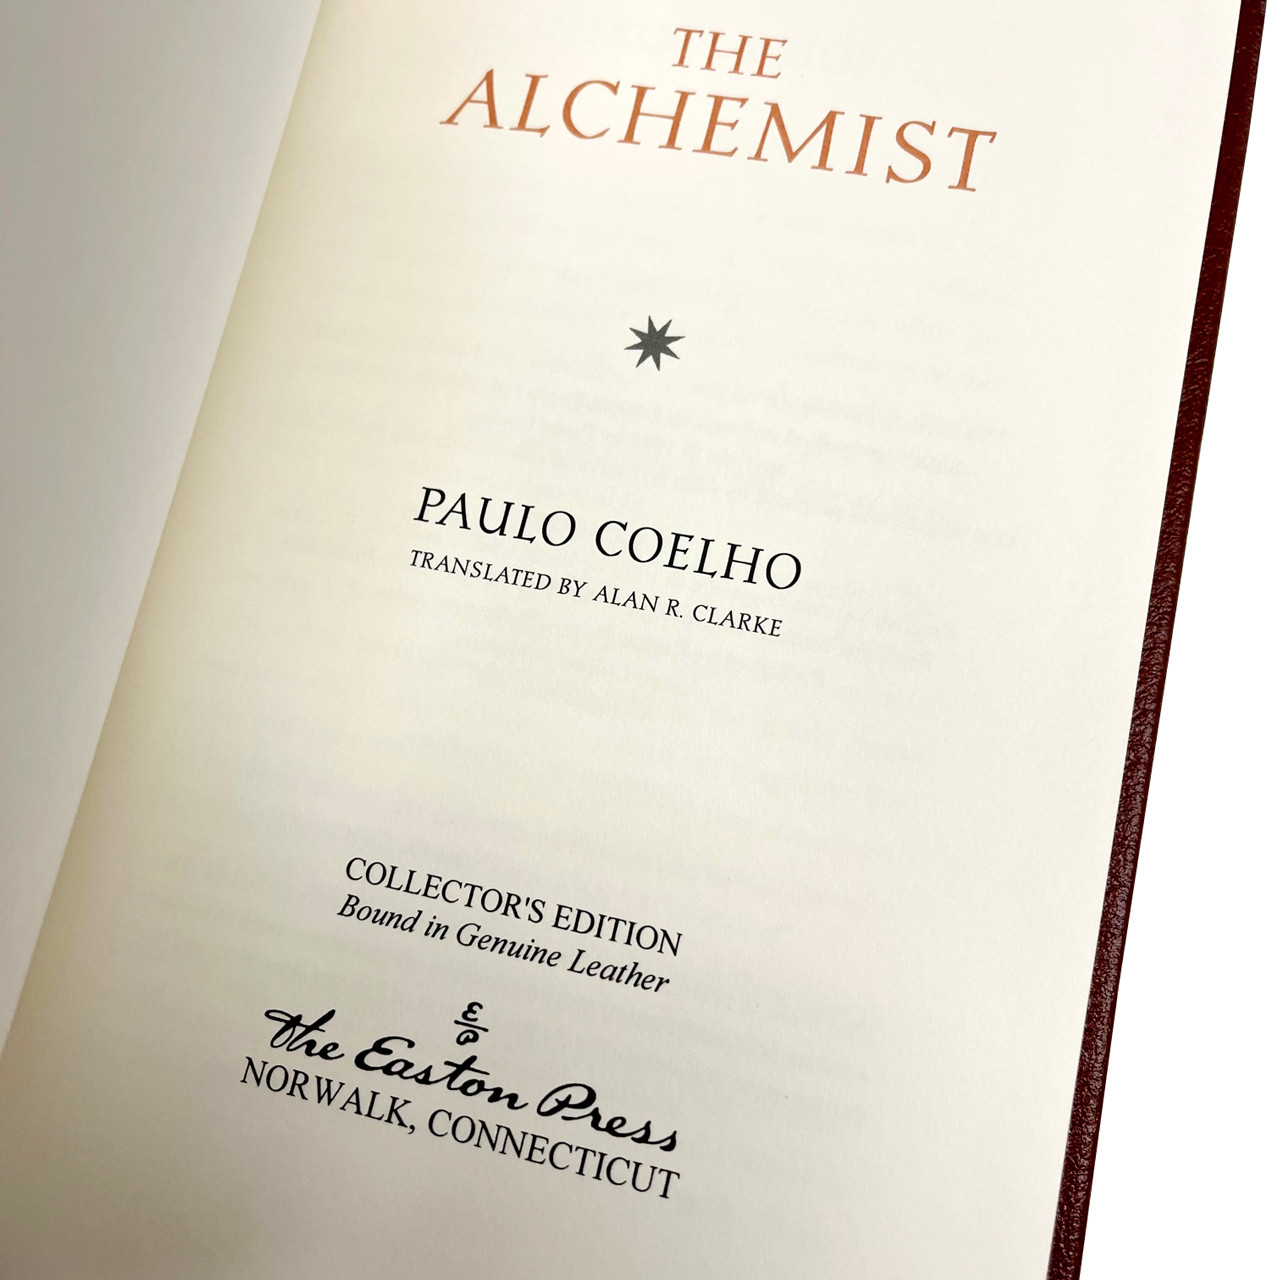 Paulo Coelho "The Alchemist" Signed Limited Edition, 2007 First Printing, Leather Bound w/COA